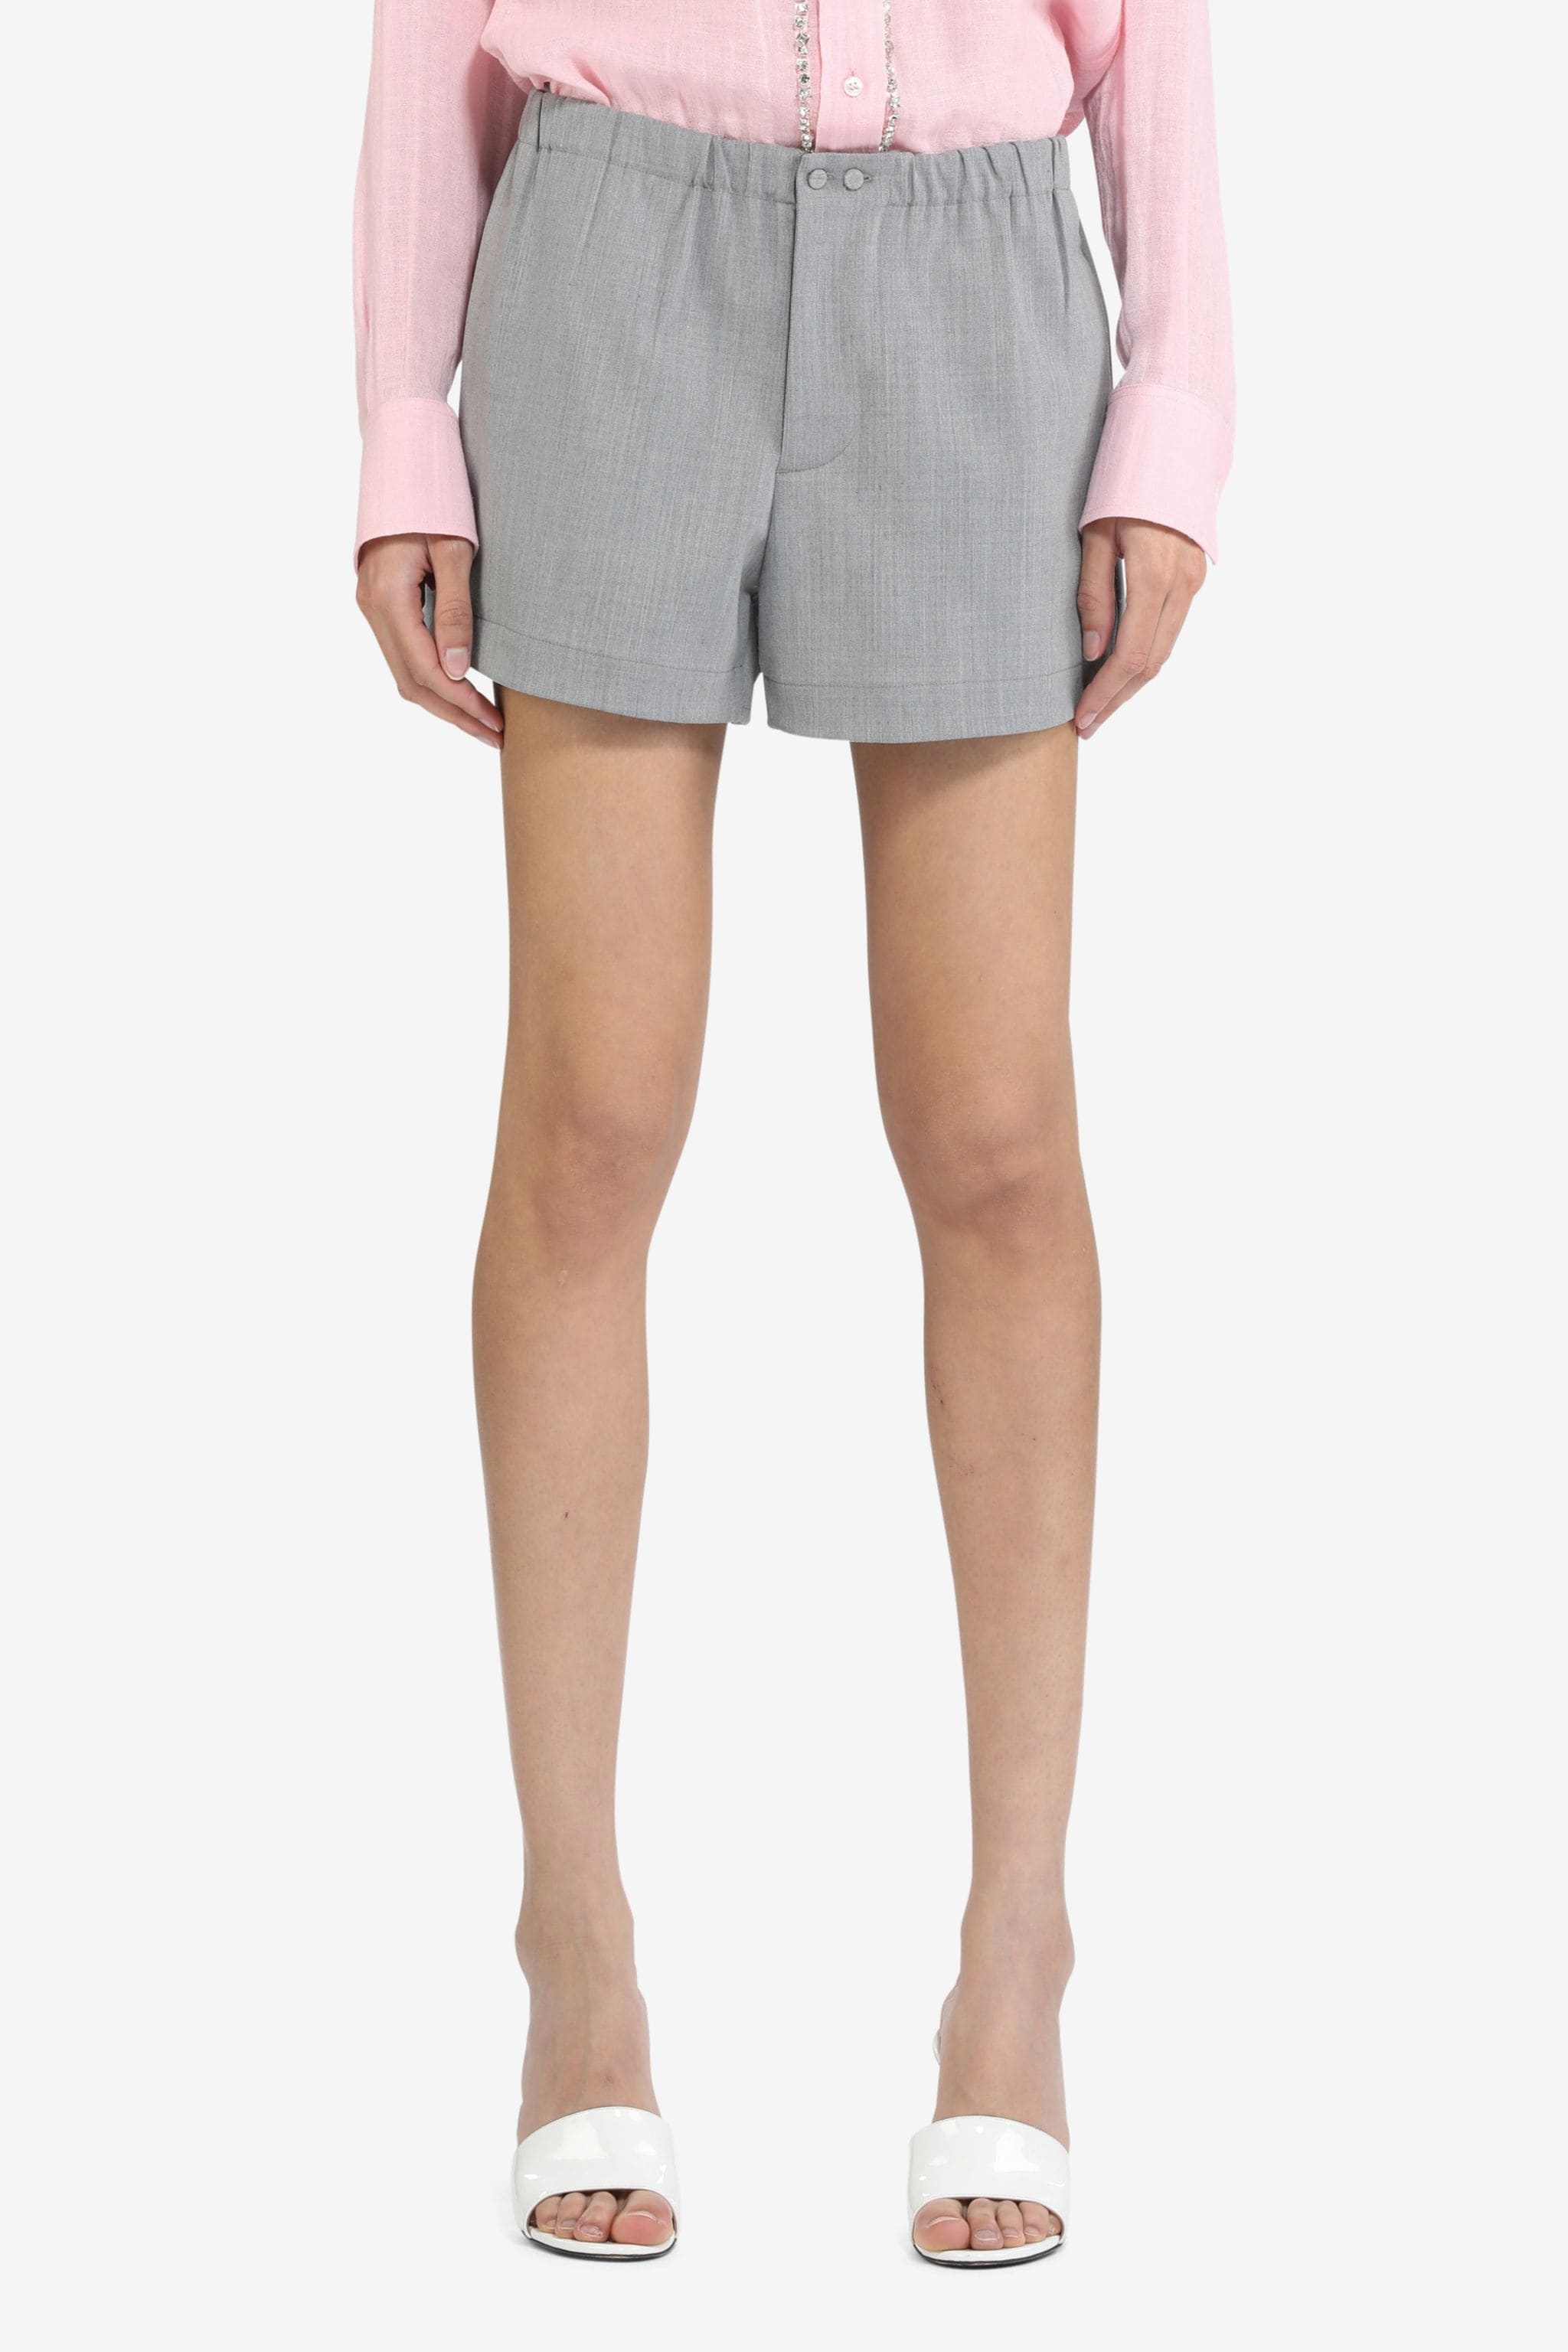 TAILORED SHORTS - 1